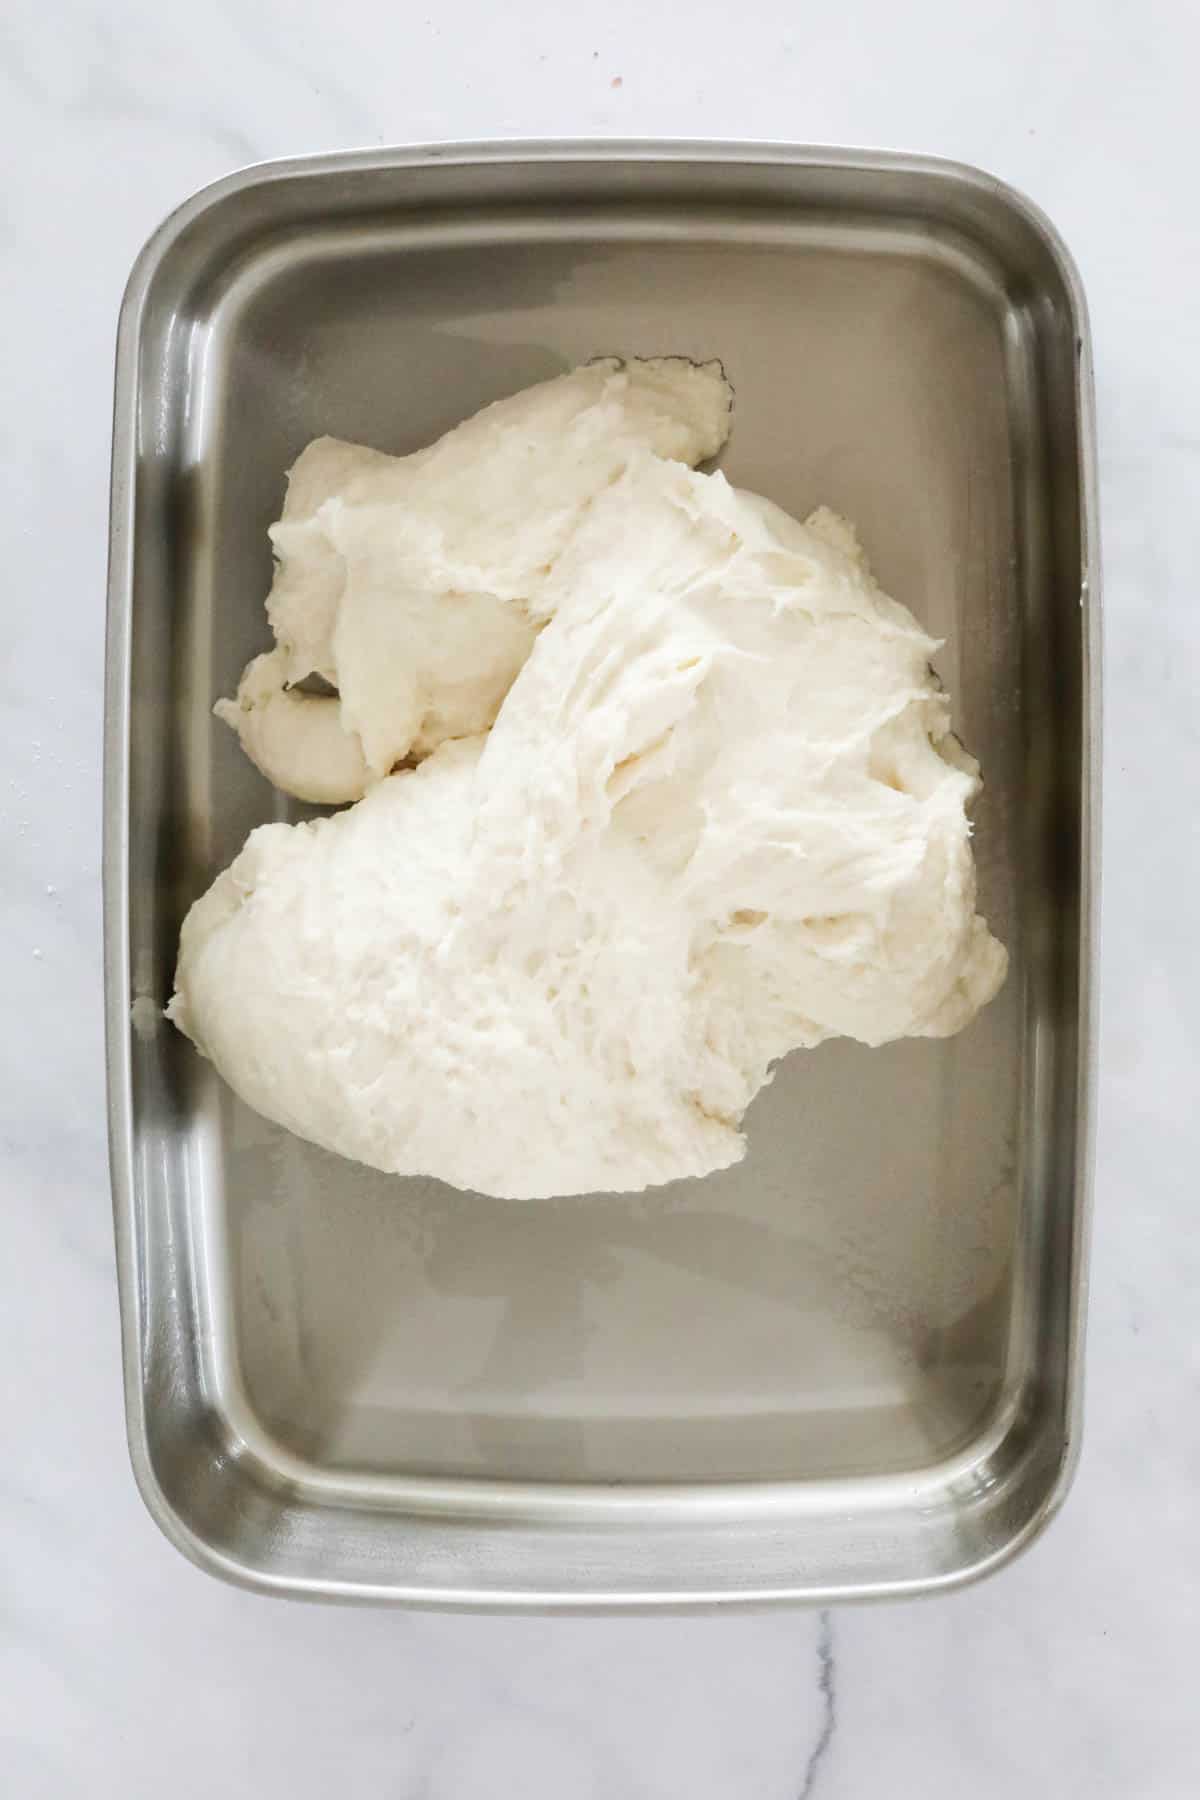 White dough in a rectangular stainless dish.